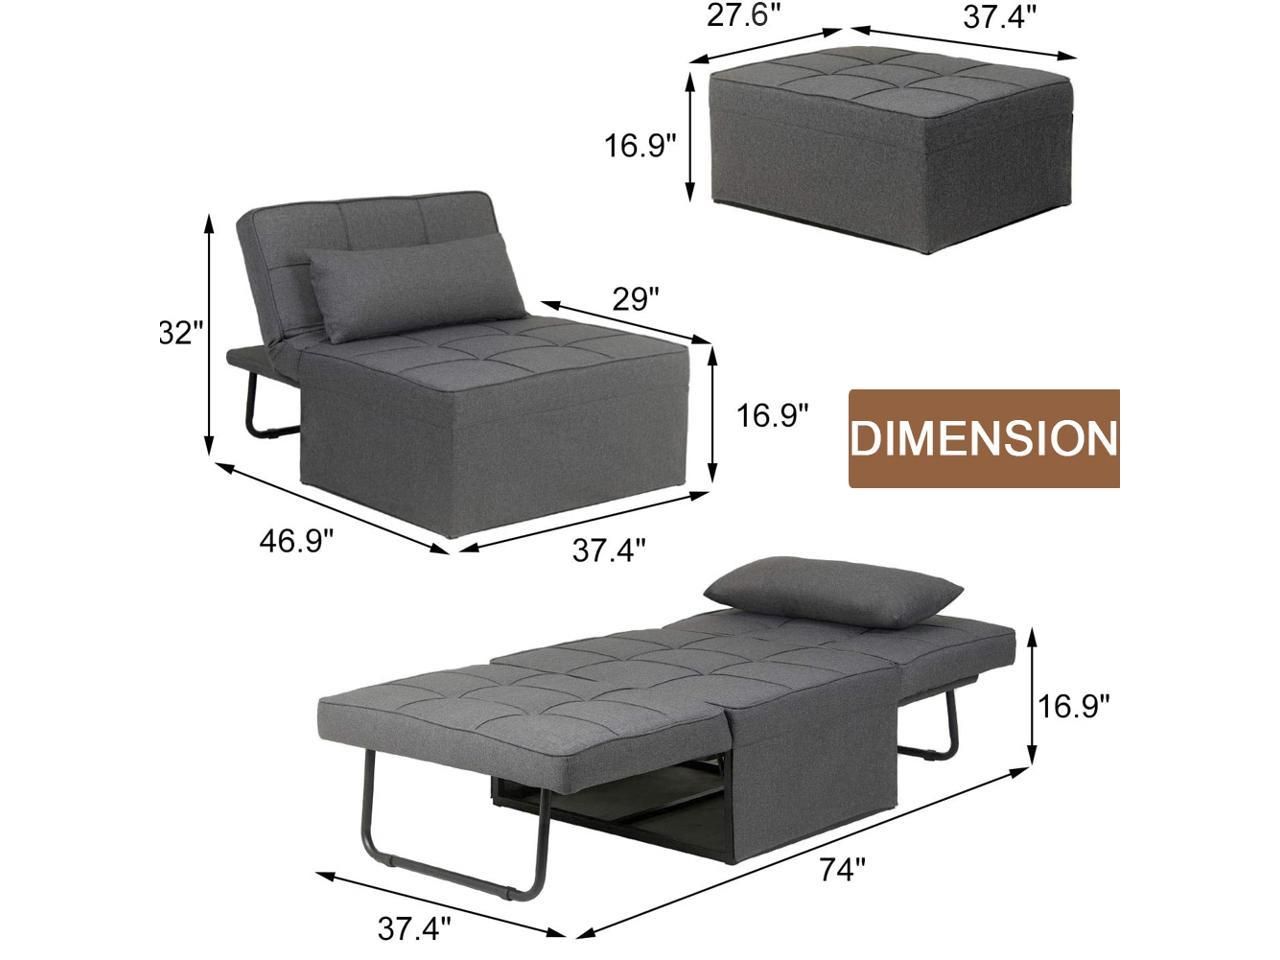 Googic Sofa Bed, Convertible Chair 4 In 1 Multi Function Folding Throughout Light Gray Fold Out Sleeper Ottomans (View 6 of 20)